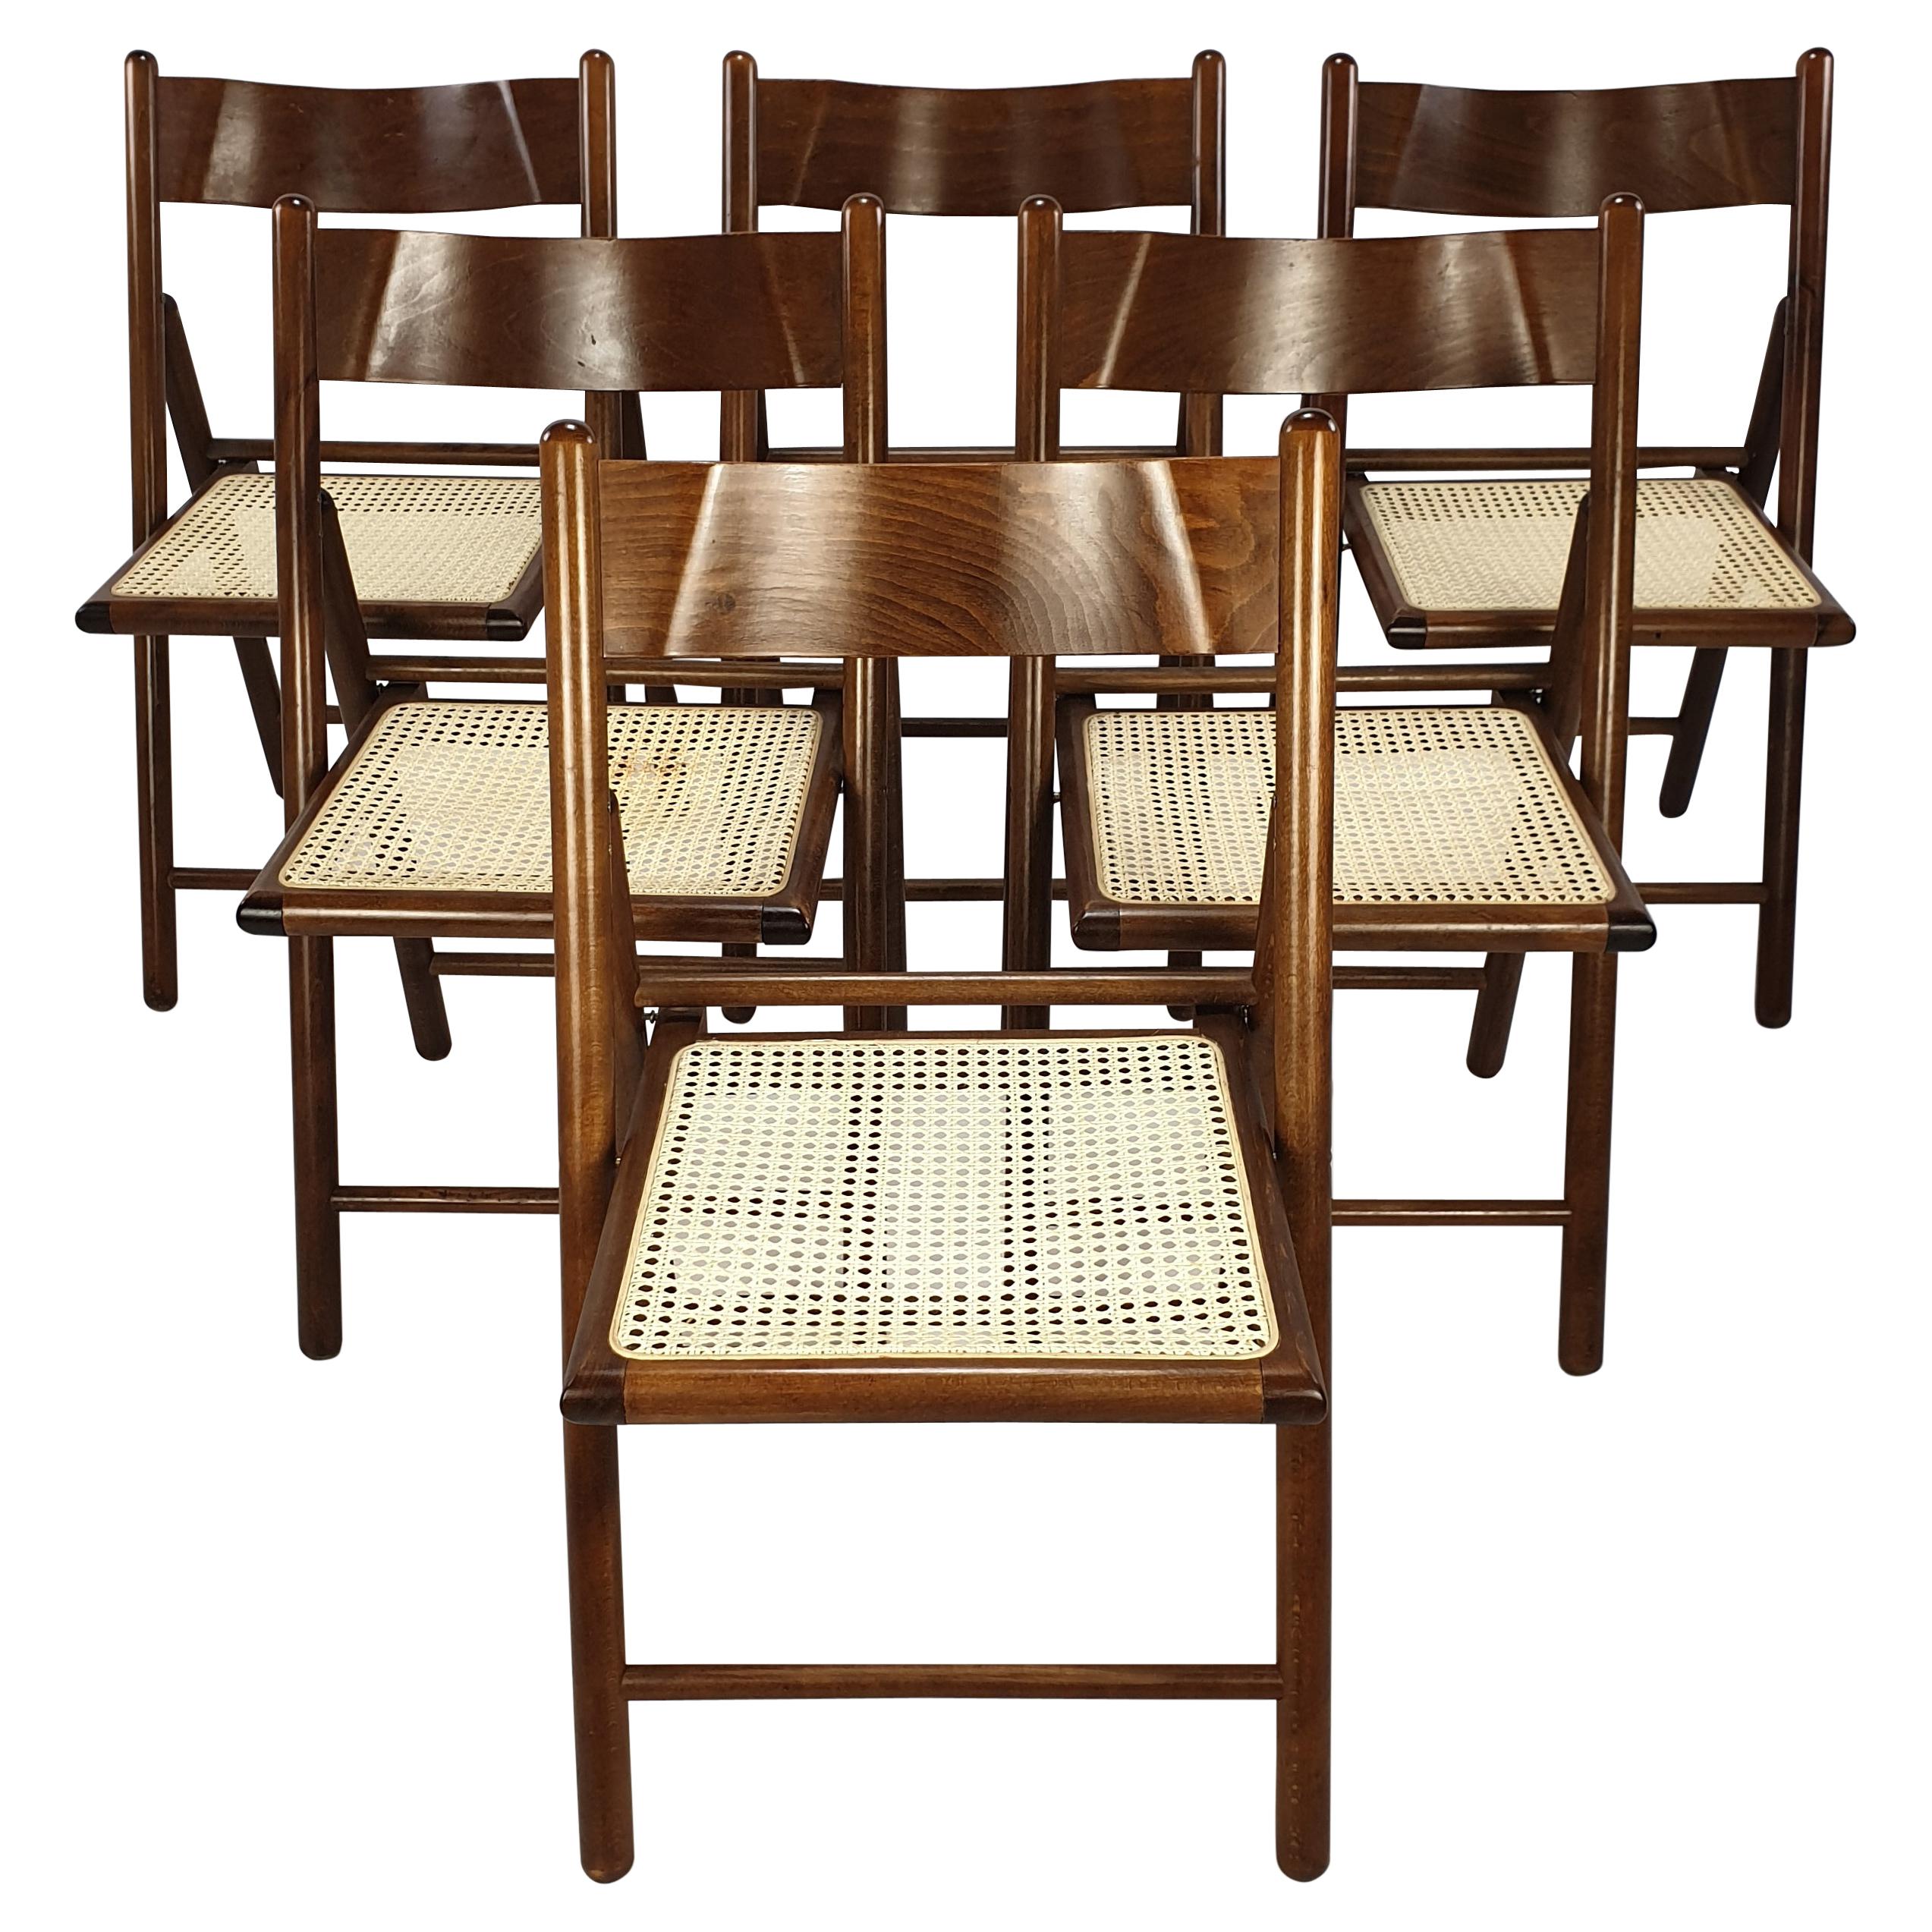 Set of 6 Italian Folding Chairs with Rattan, 1980's